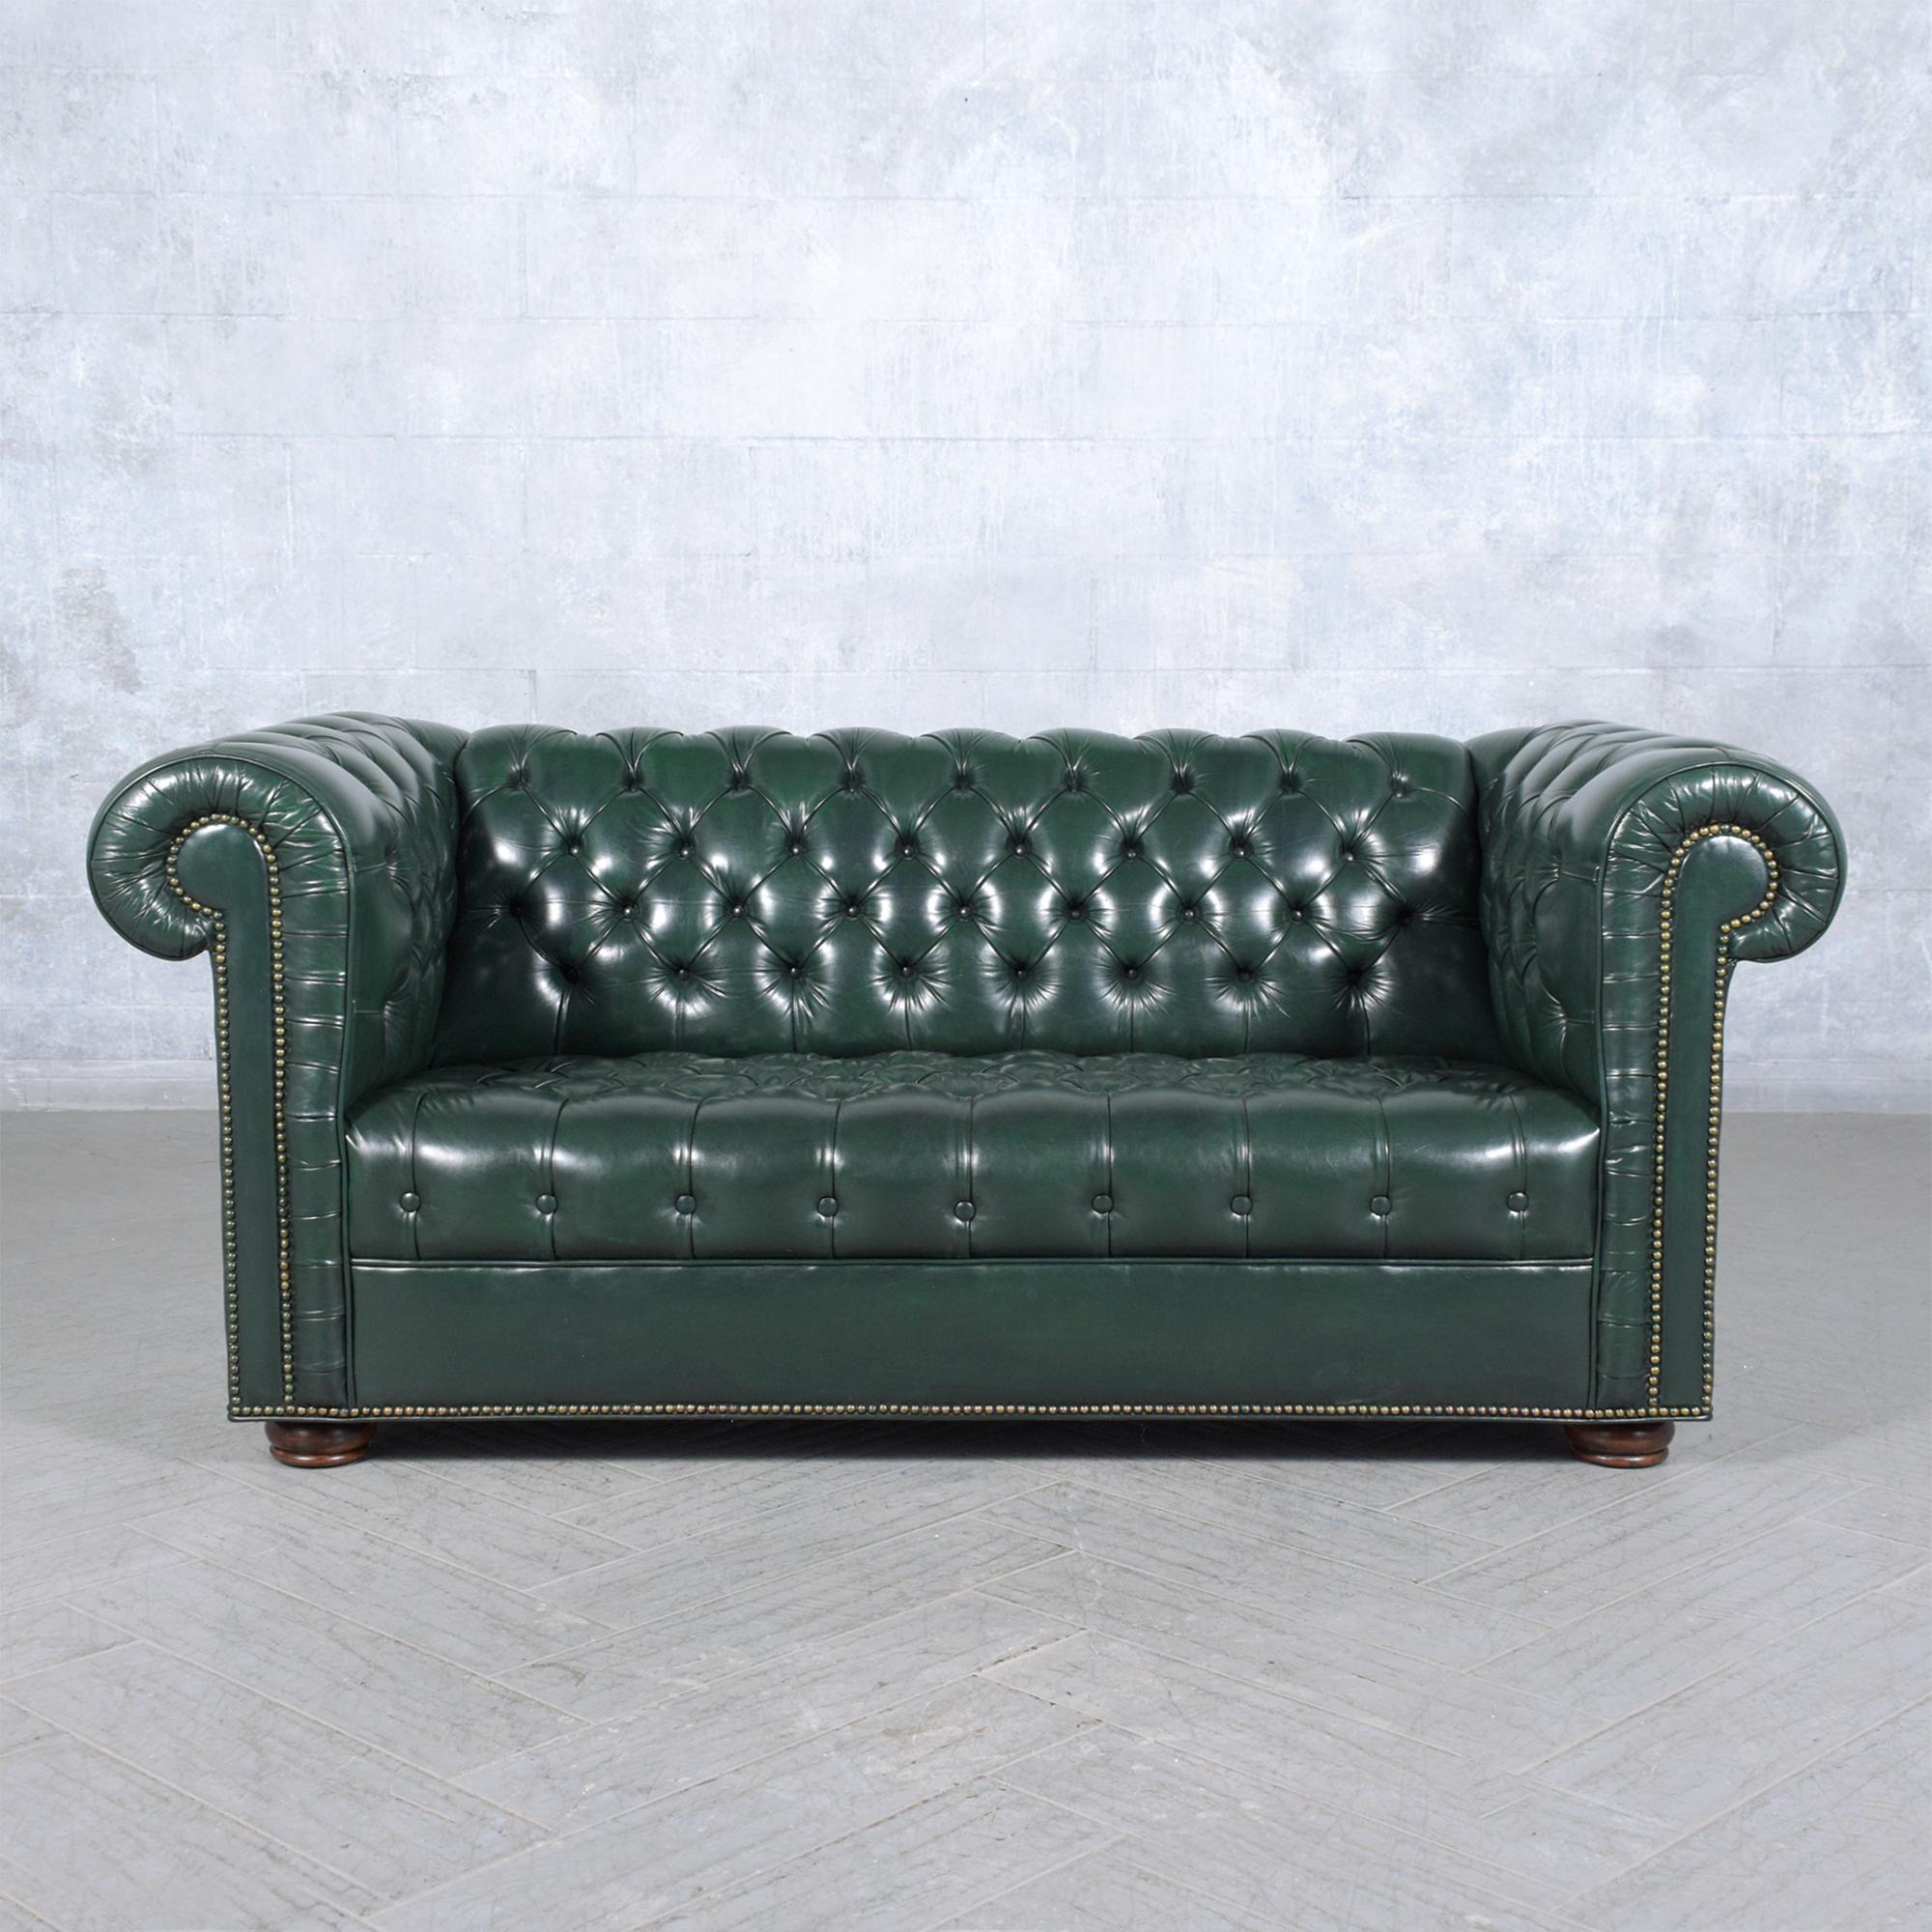 Immerse yourself in the opulent charm of the 1970s with our vintage Chesterfield sofa, a masterpiece of craftsmanship and style. Hand-crafted from a solid wood and leather combination, this sofa has undergone a complete restoration by our team of